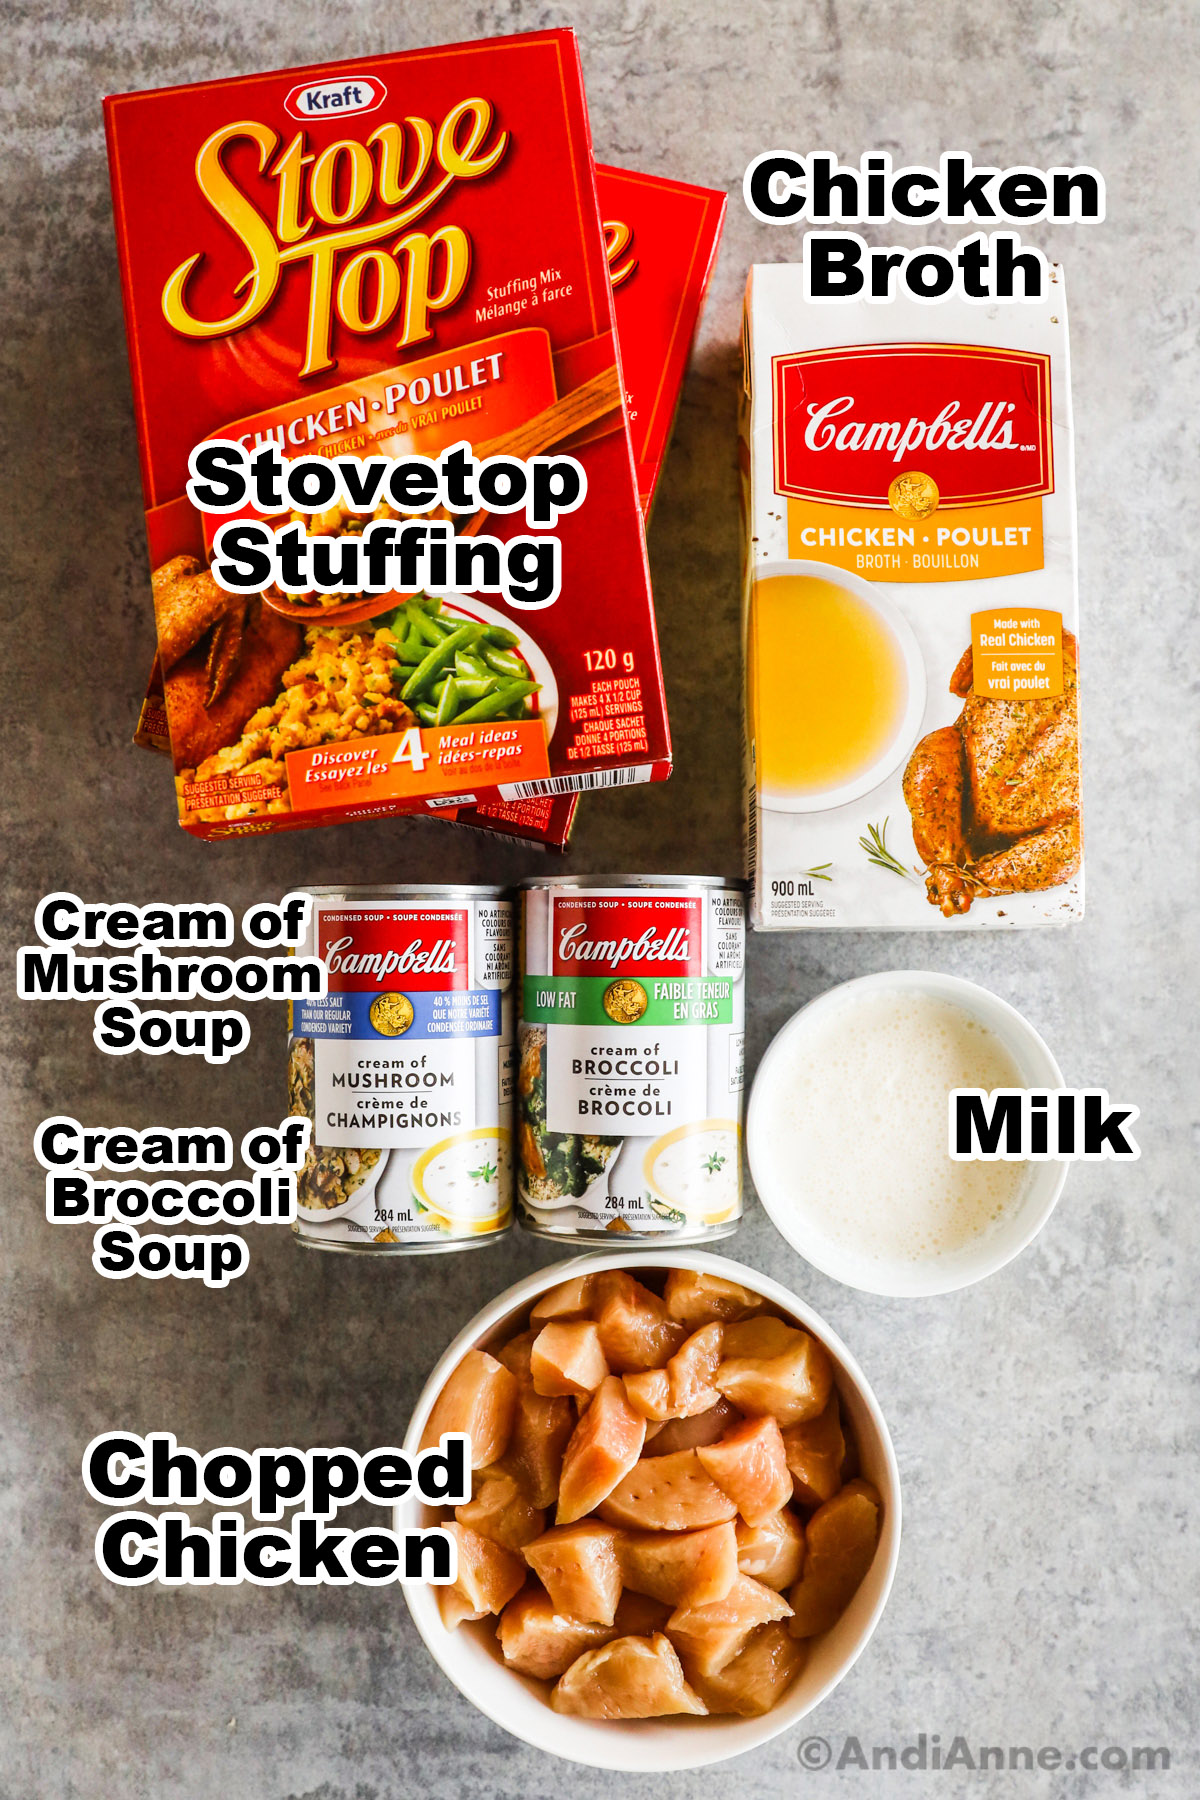 Recipe ingredients including stove top stuffing, chicken broth, condensed cream of mushroom and broccoli soup, milk, and chopped raw chicken